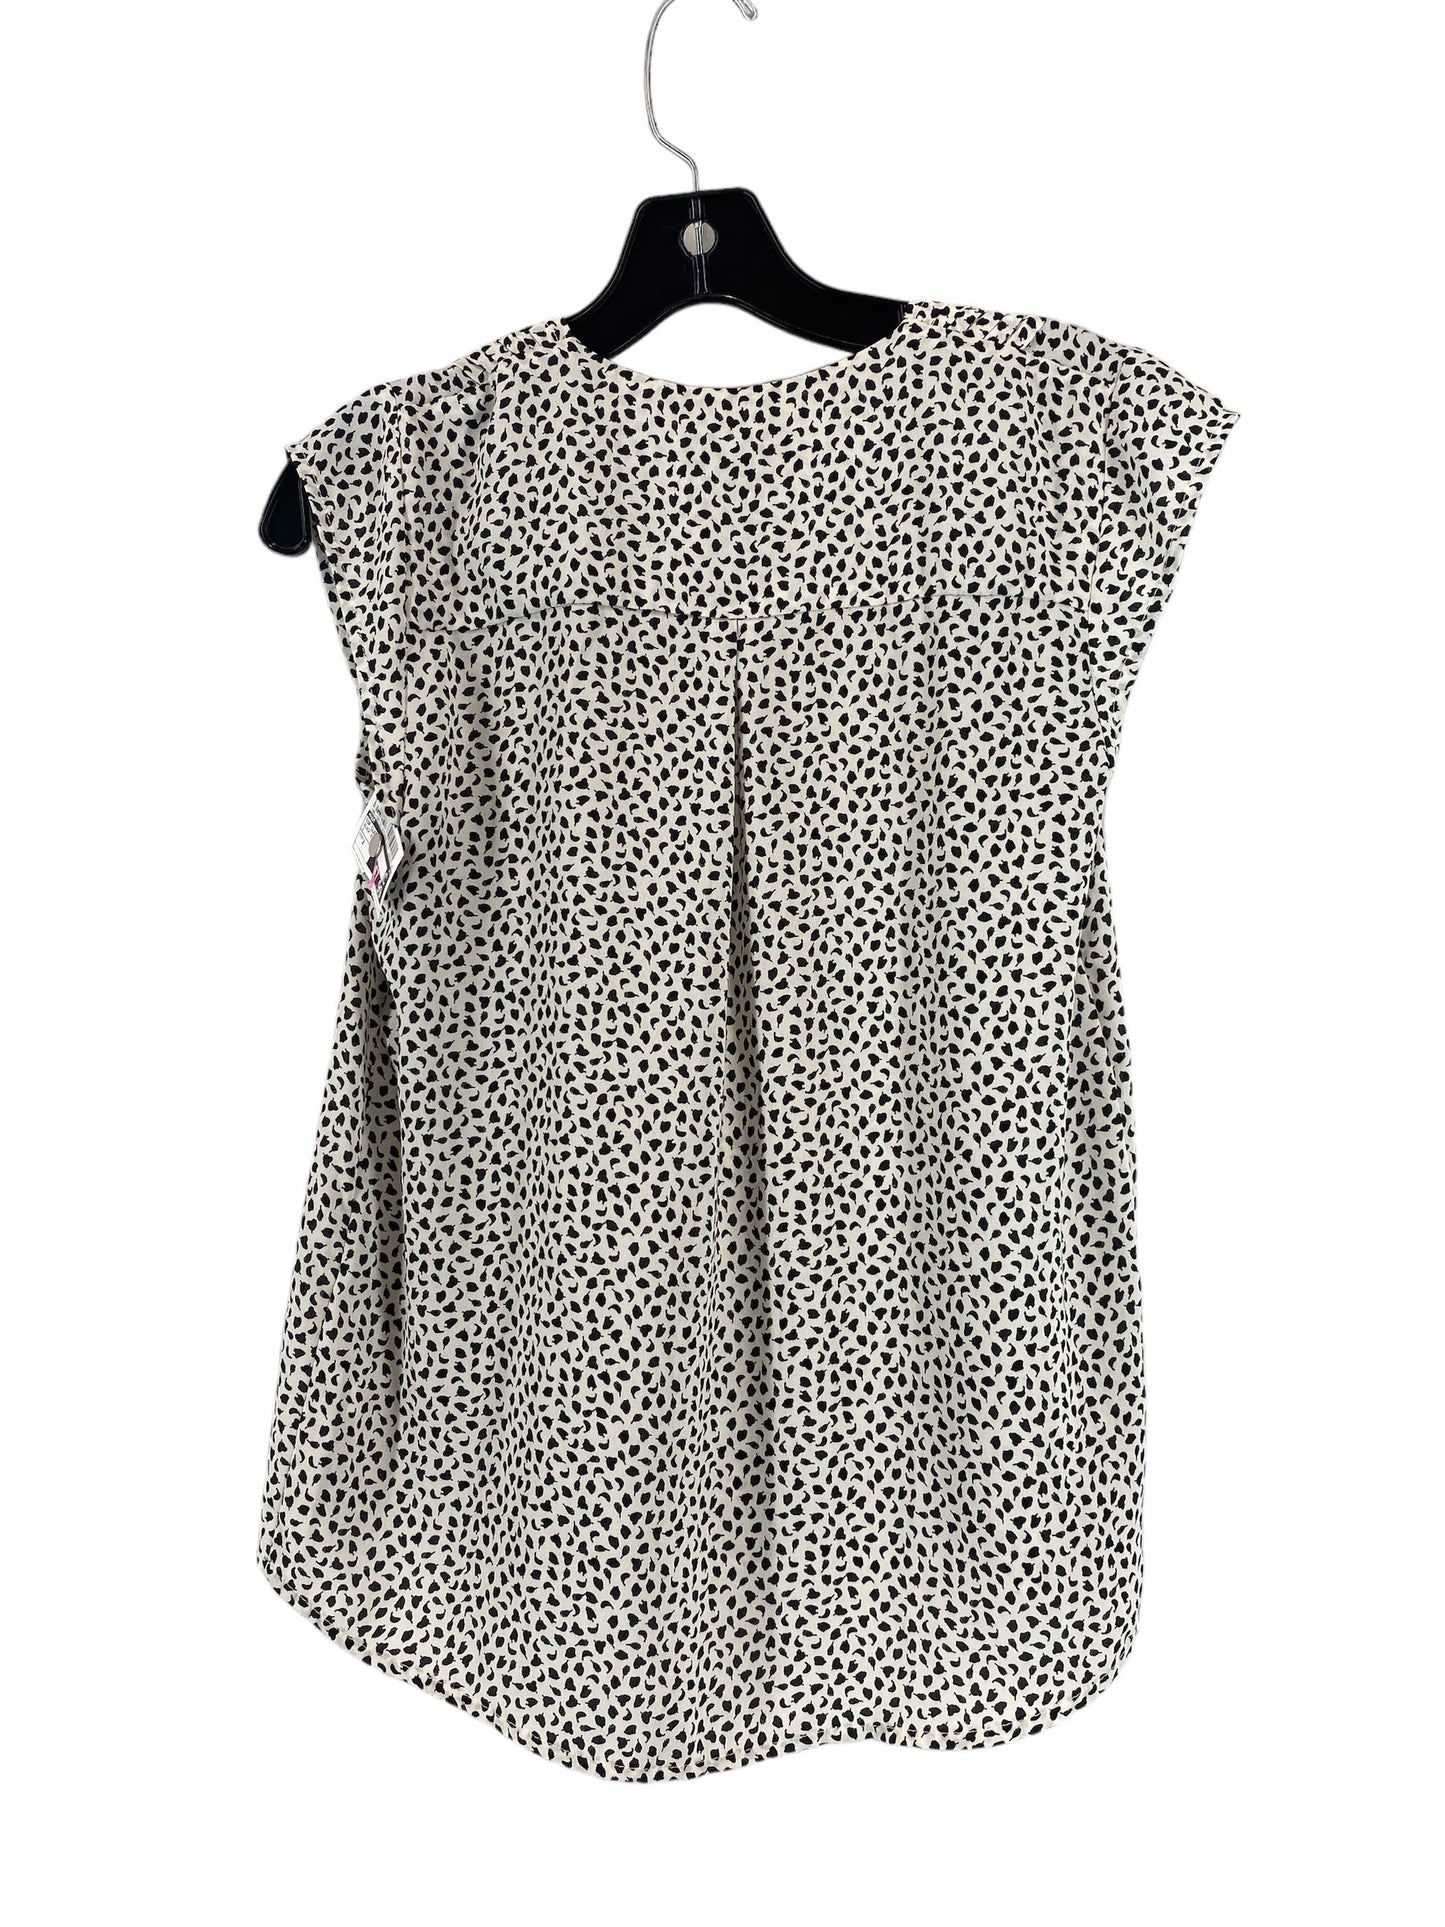 Top Sleeveless By H&m  Size: 2